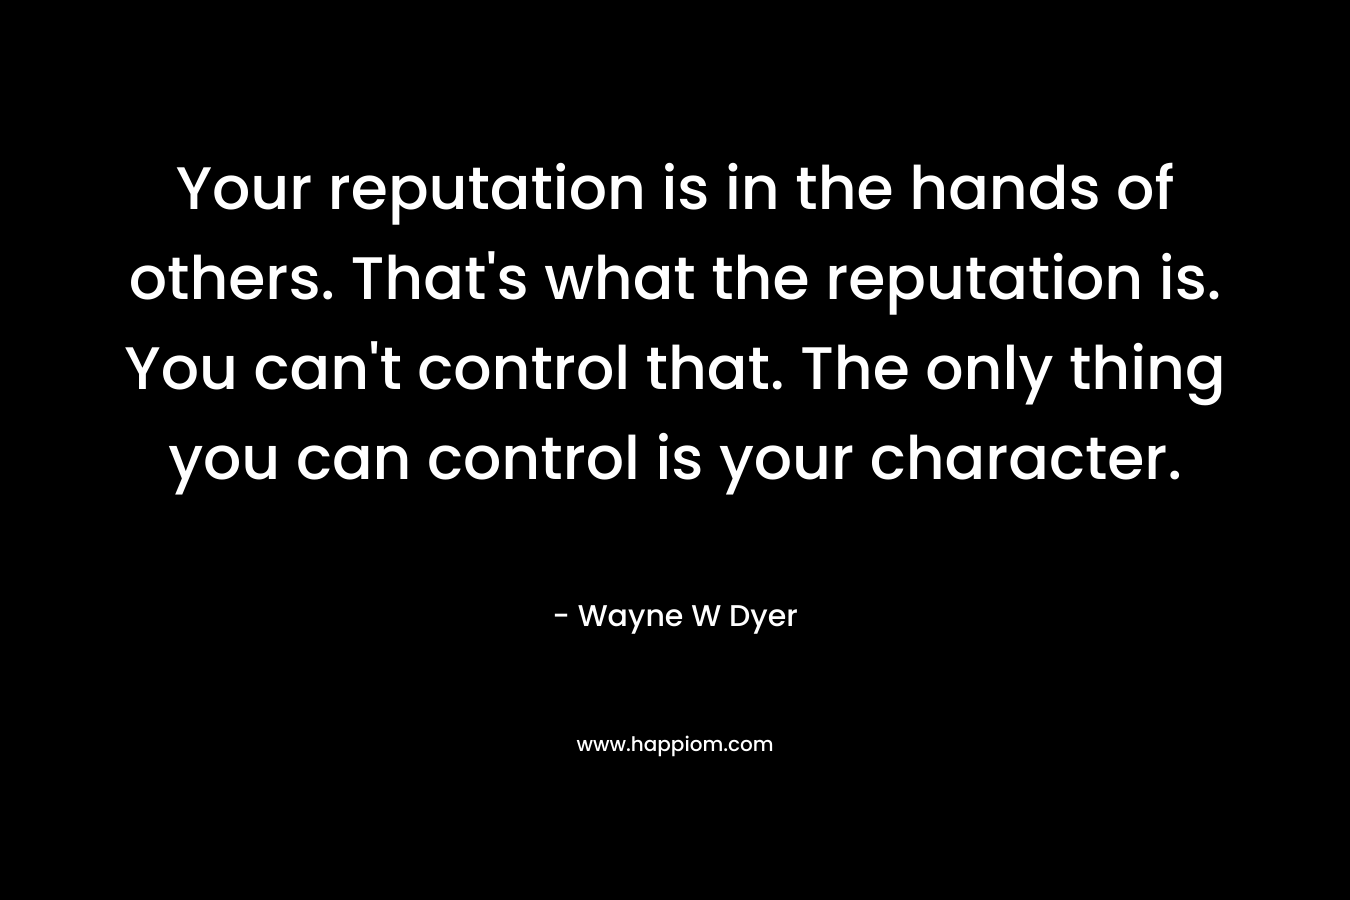 Your reputation is in the hands of others. That's what the reputation is. You can't control that. The only thing you can control is your character.